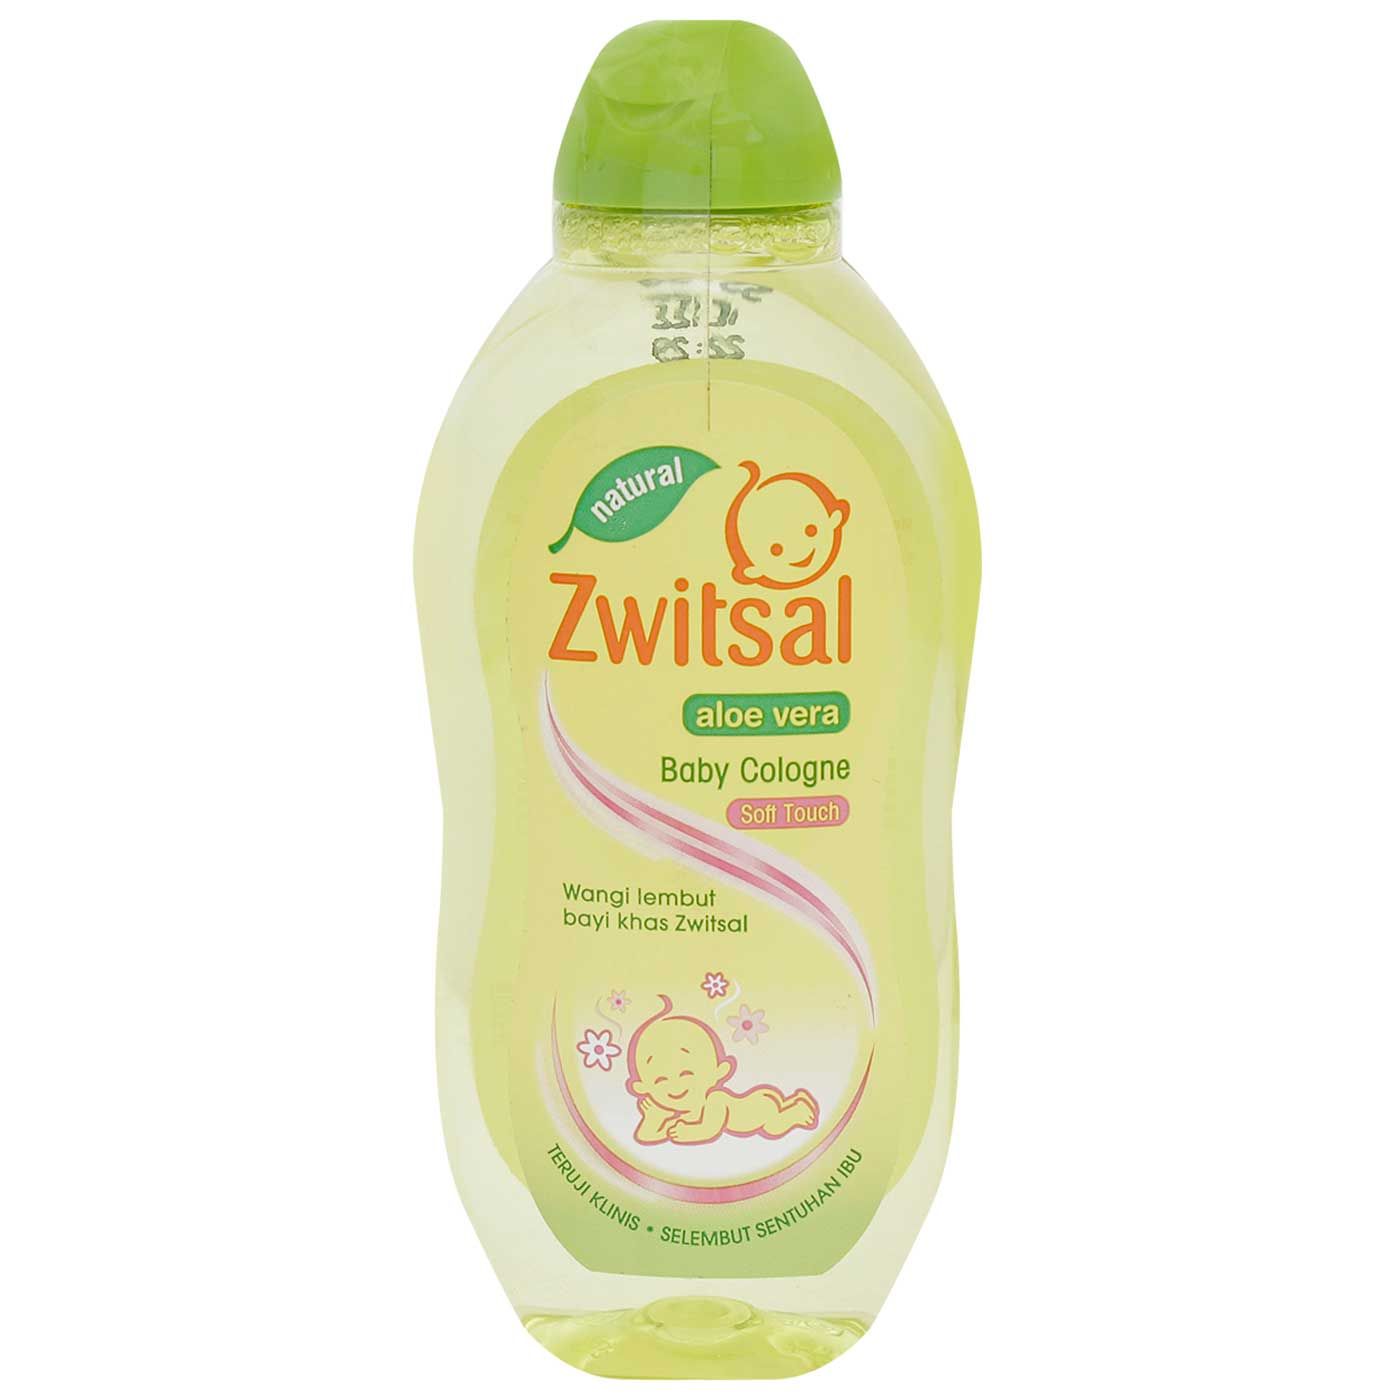 Zwitsal Natural Baby Cologne Soft Touch 100ml - 2